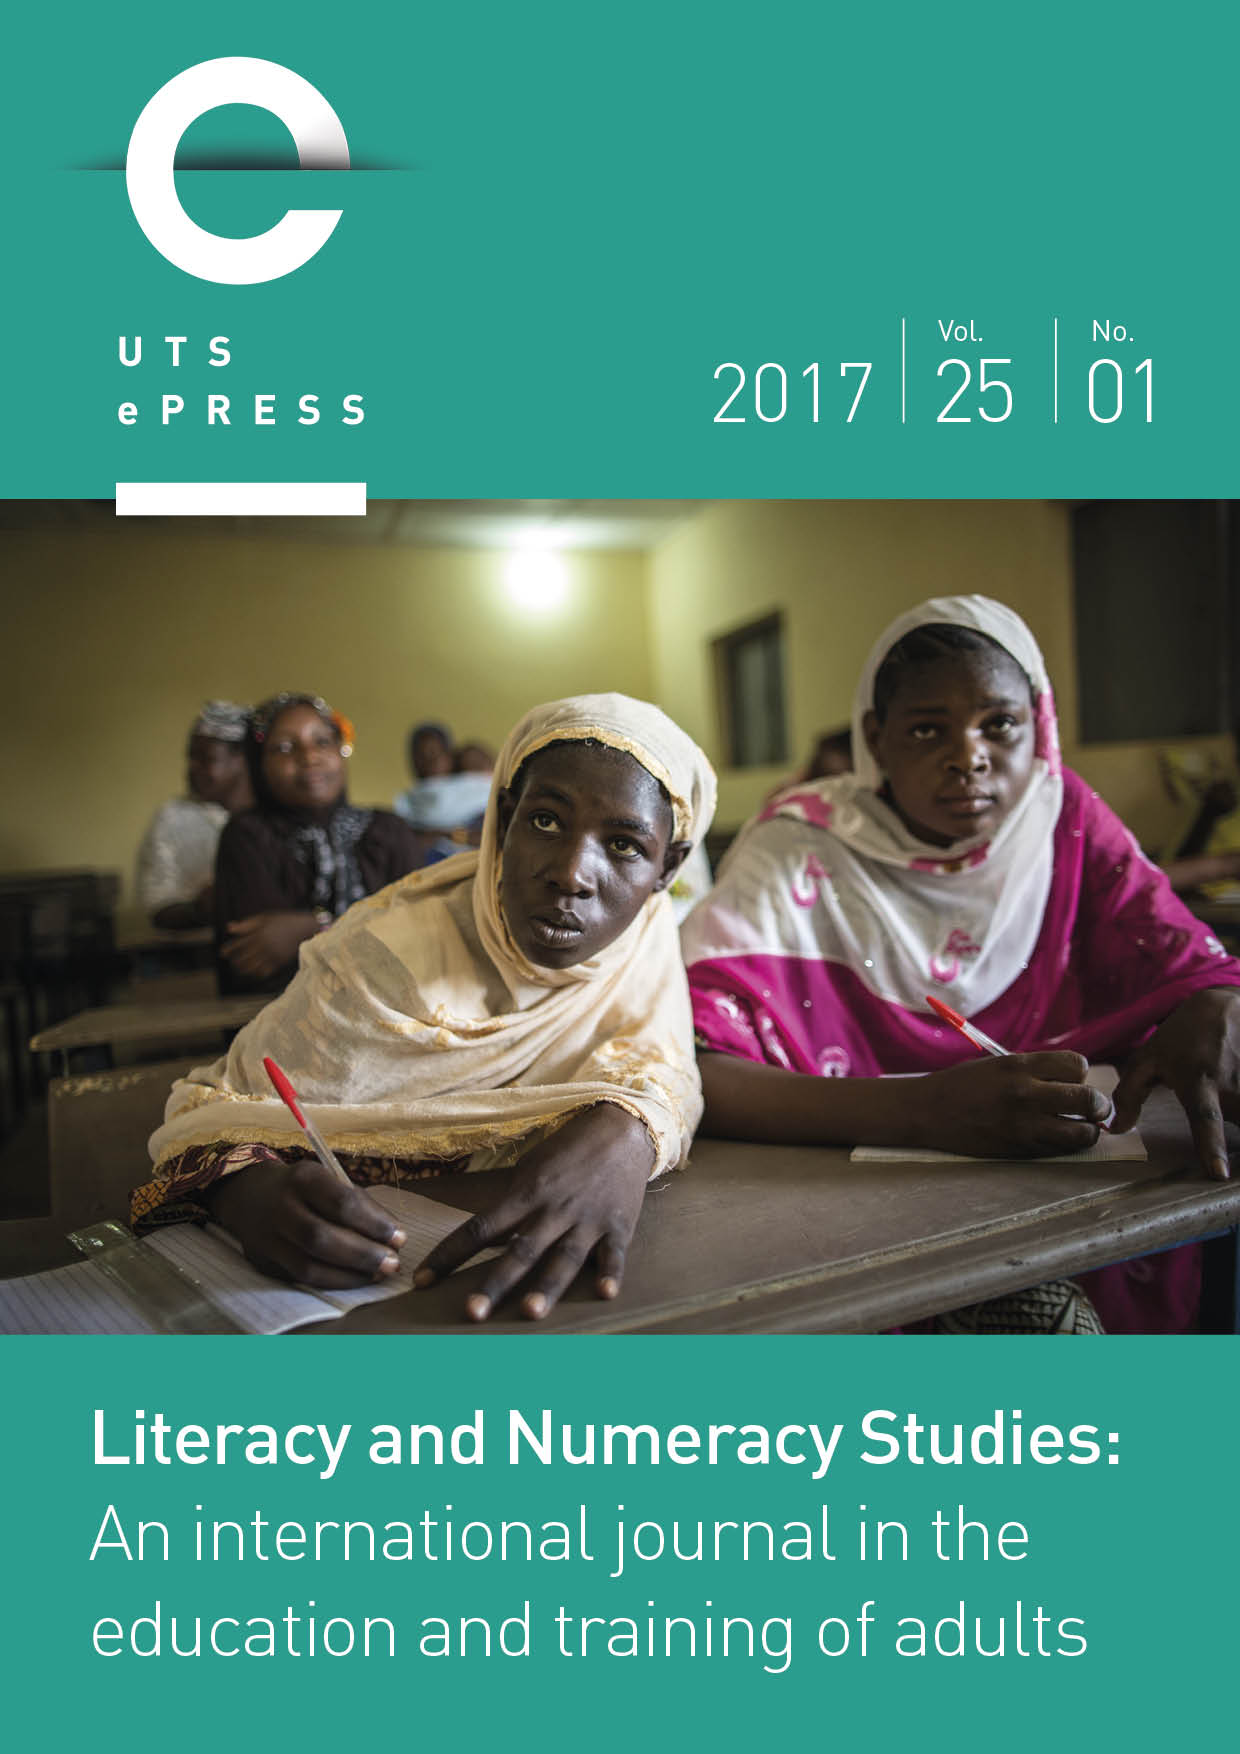 Literacy and Numeracy Studies cover: Volume 25, Issue 1 (2017).